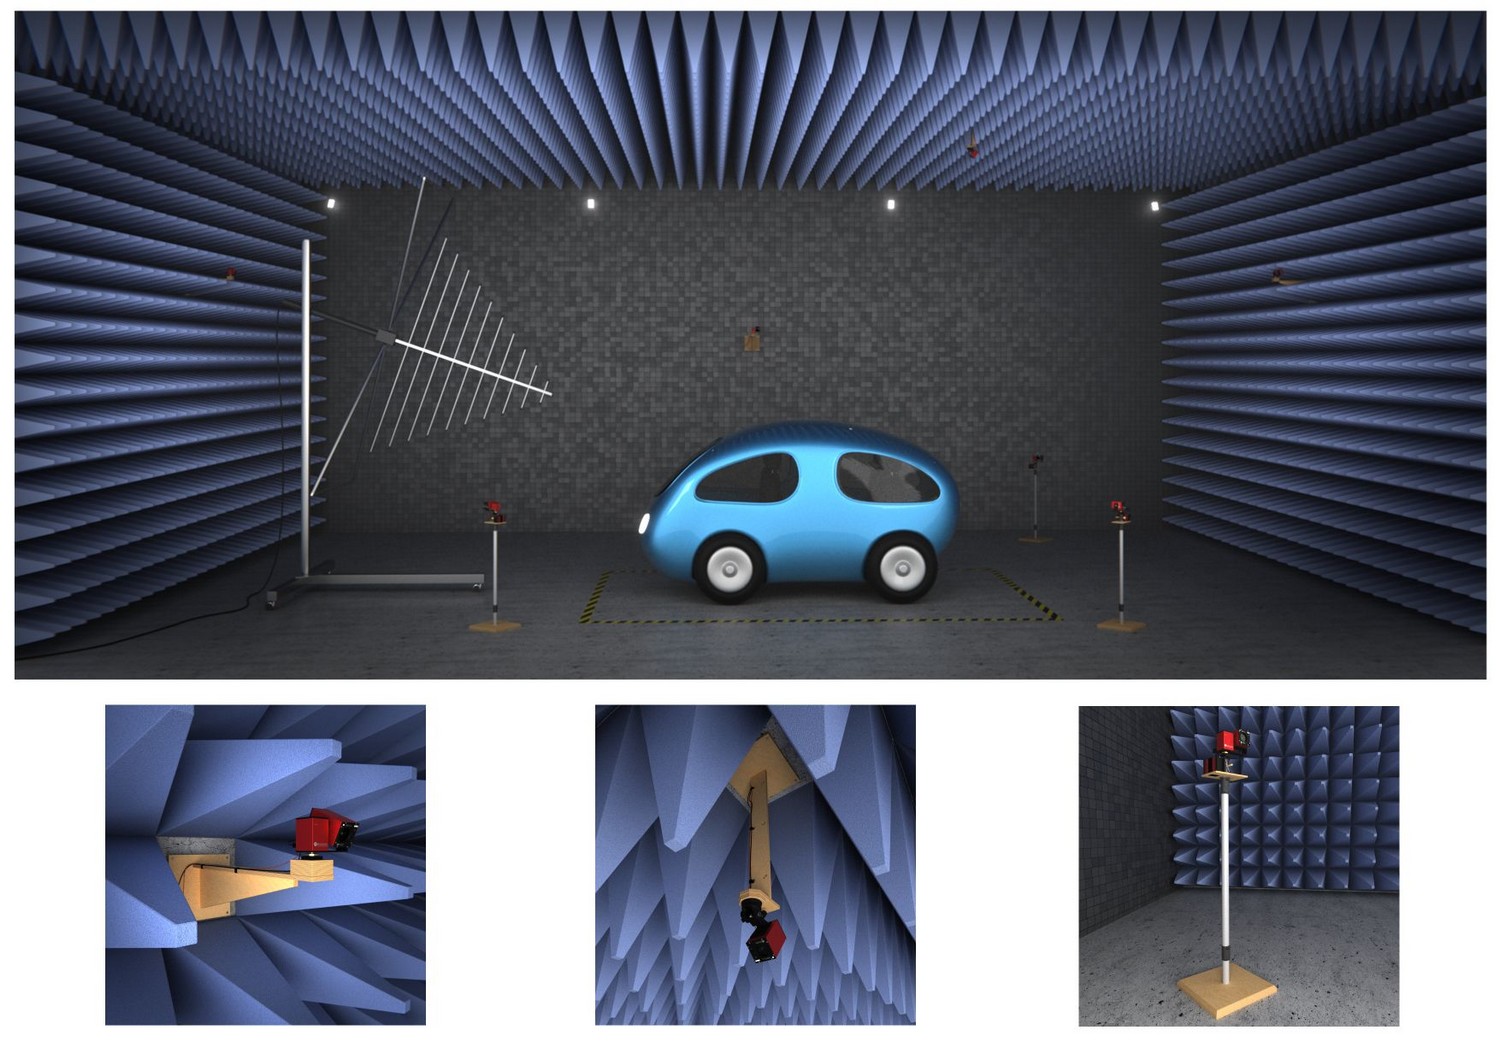 anechoic chamber with wallmount, ceiling mount, and monopod